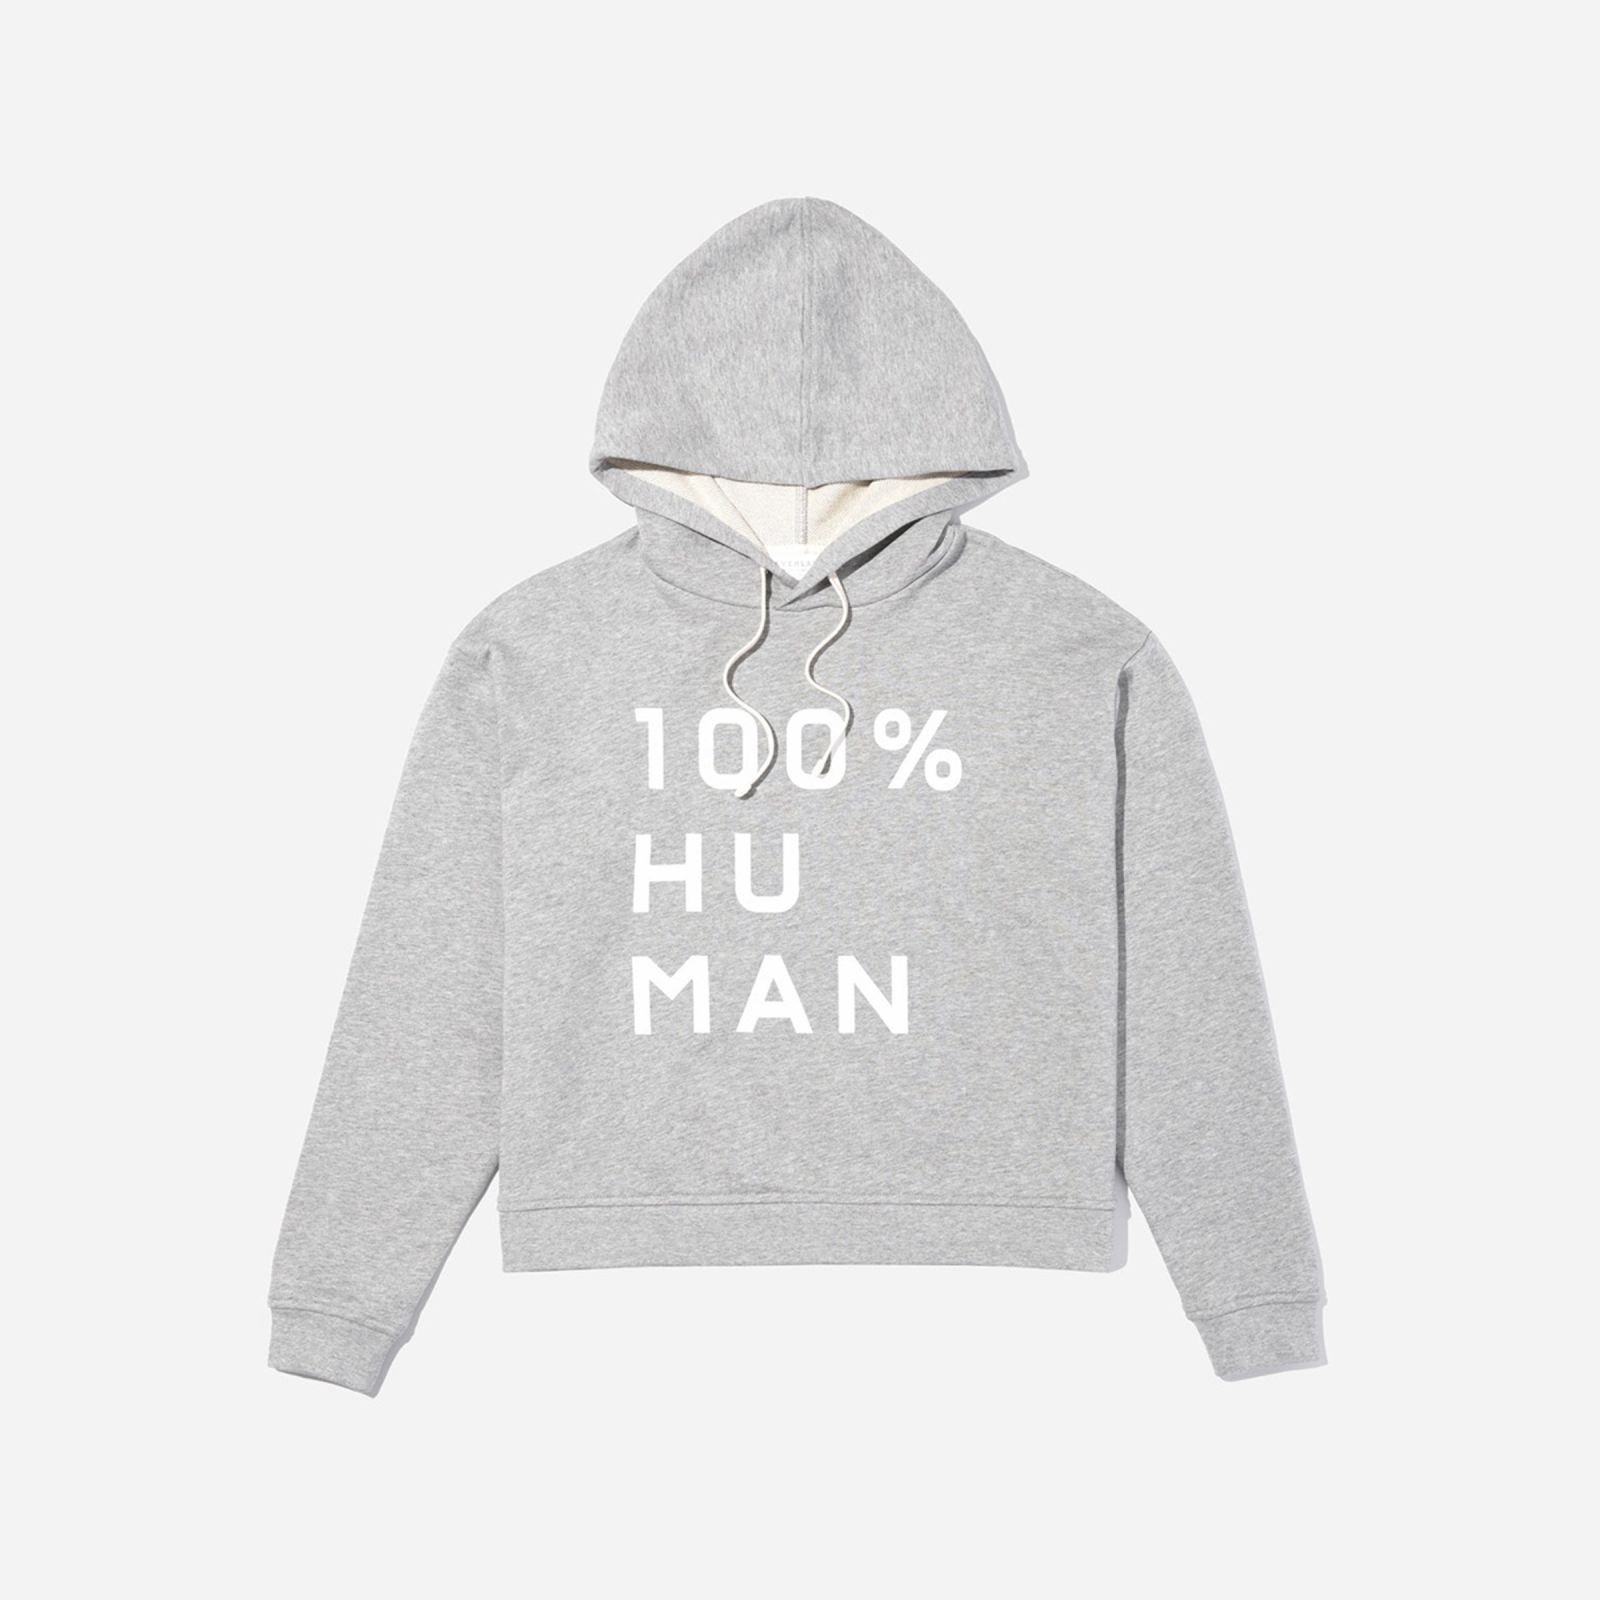 Women's 100% Human French Terry Hoodie in Large Print by Everlane in Heather Grey, Size XXS | Everlane